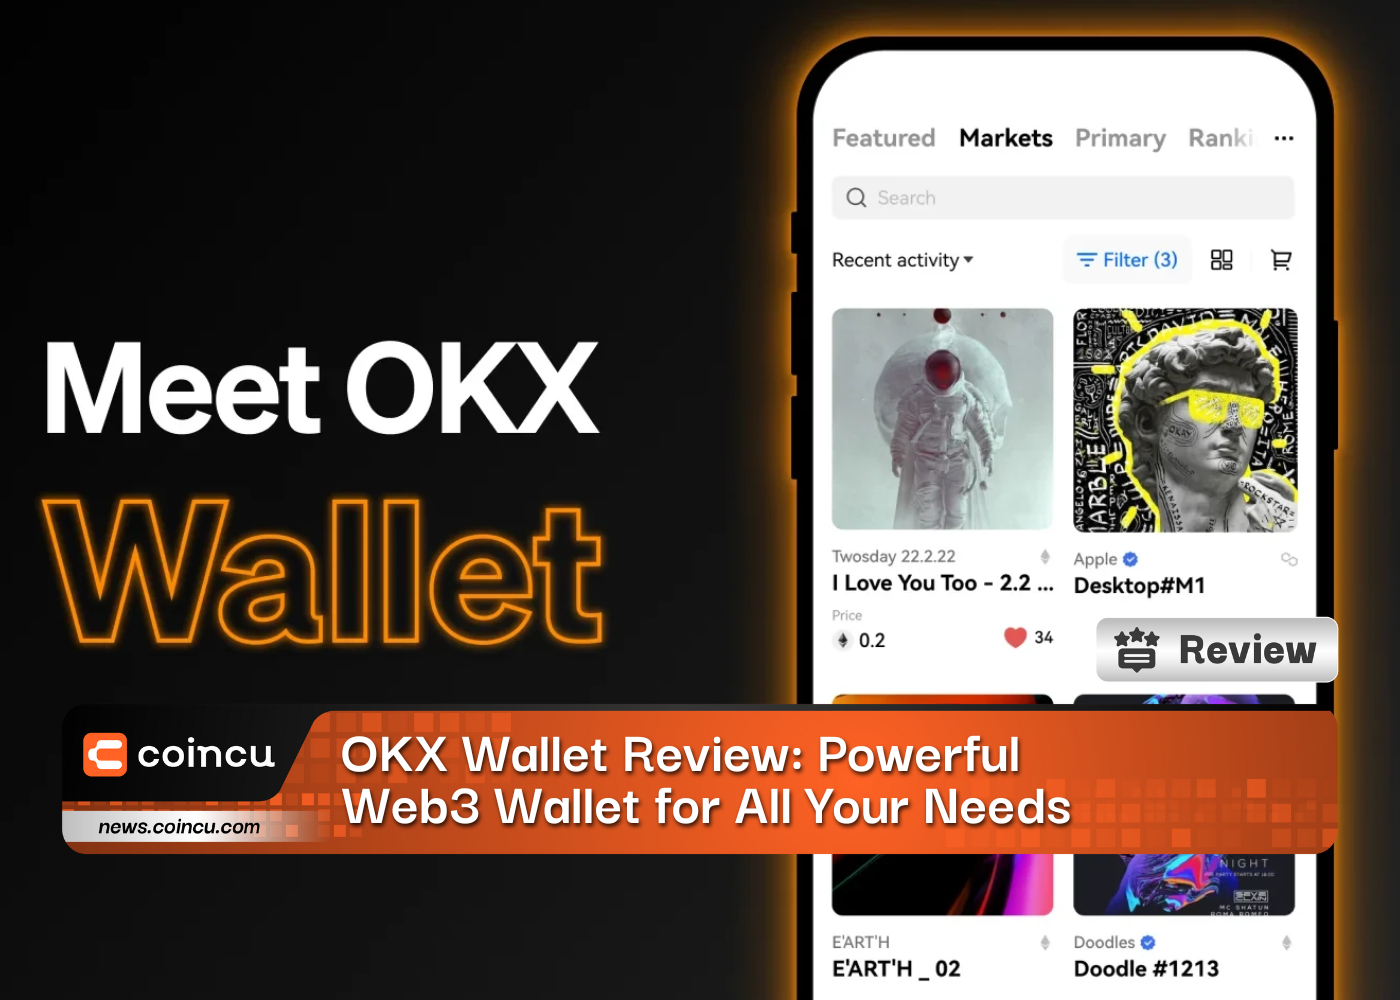 OKX Wallet Review: Powerful Web3 Wallet for All Your Needs